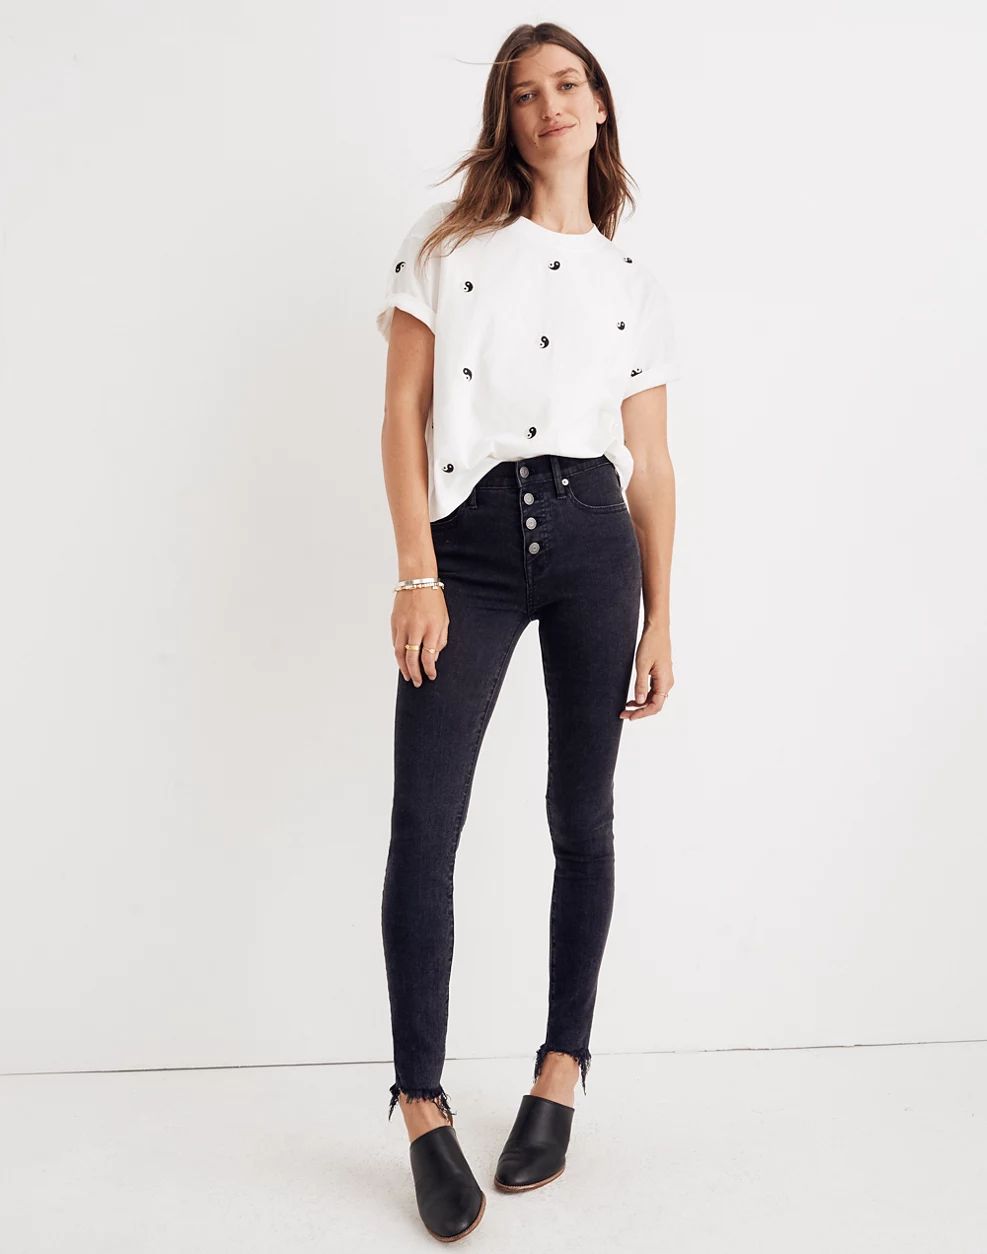 9" High-Rise Skinny Jeans in Berkeley Black: Button-Through Edition | Madewell